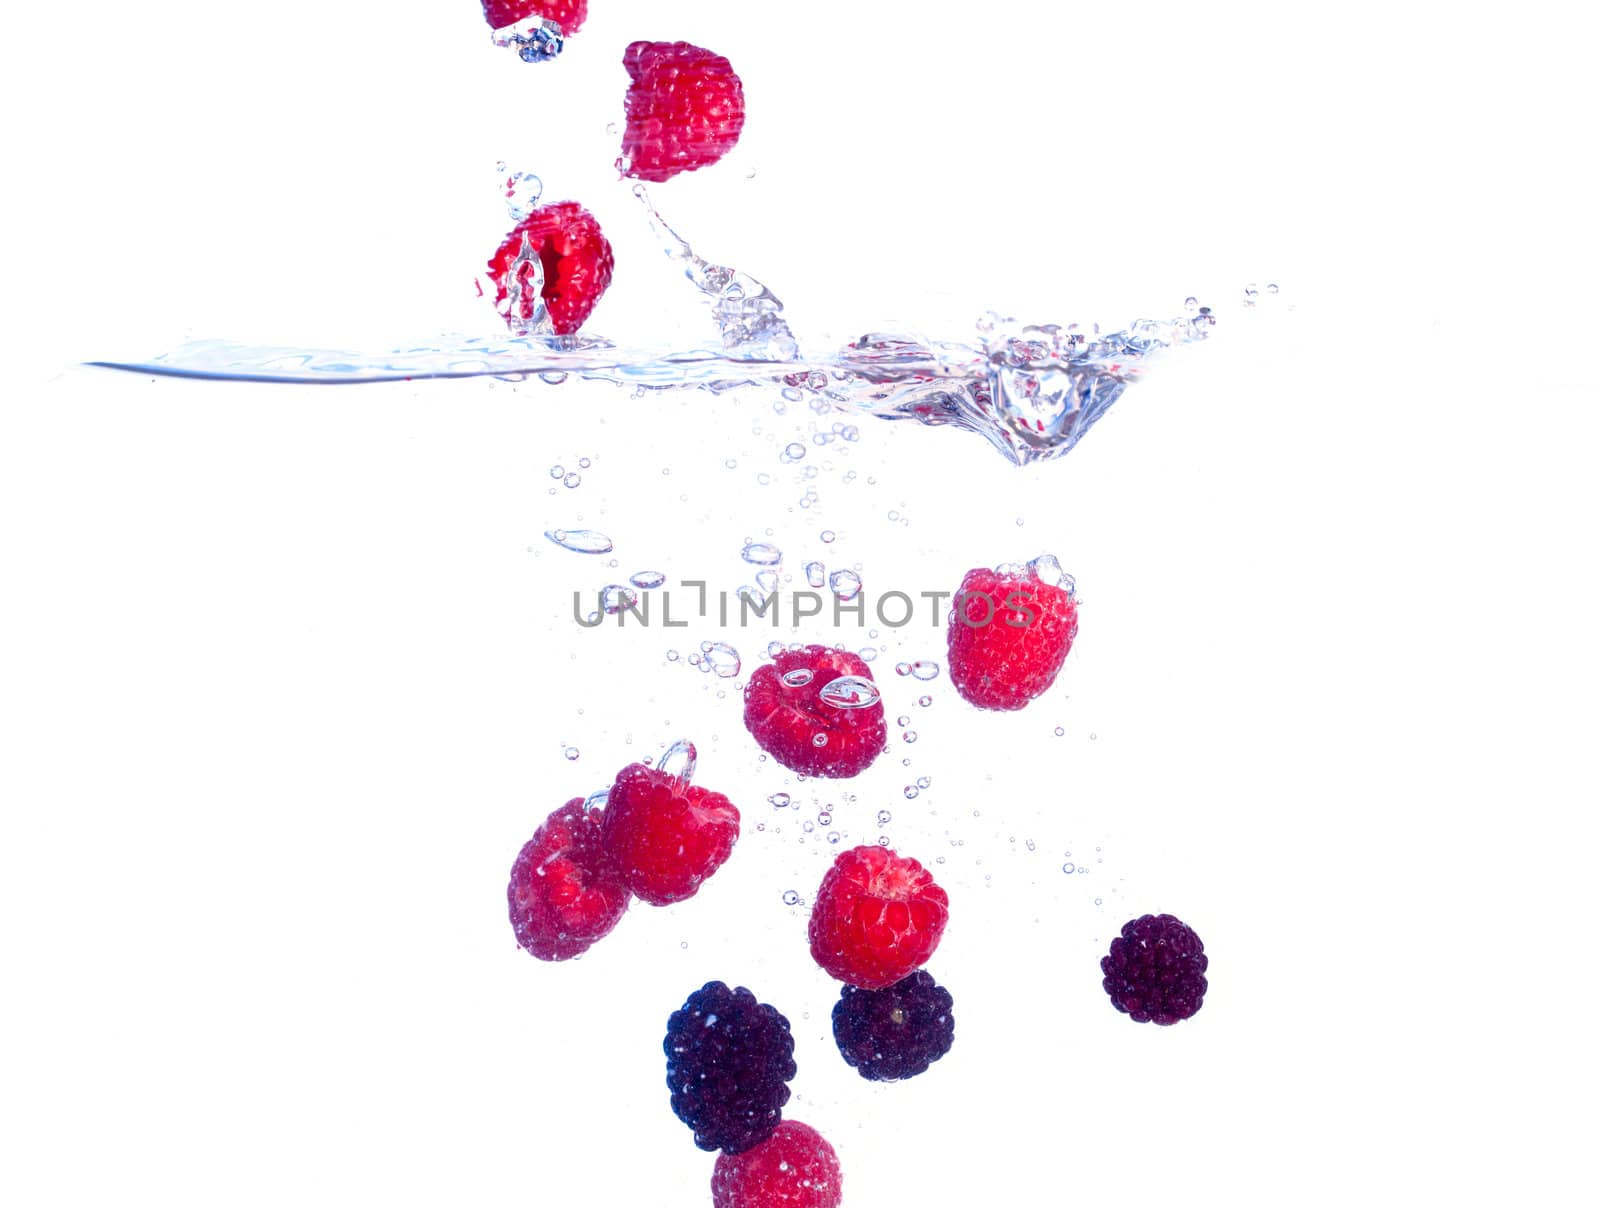 Berries Falls under Water with a Splash, isolated